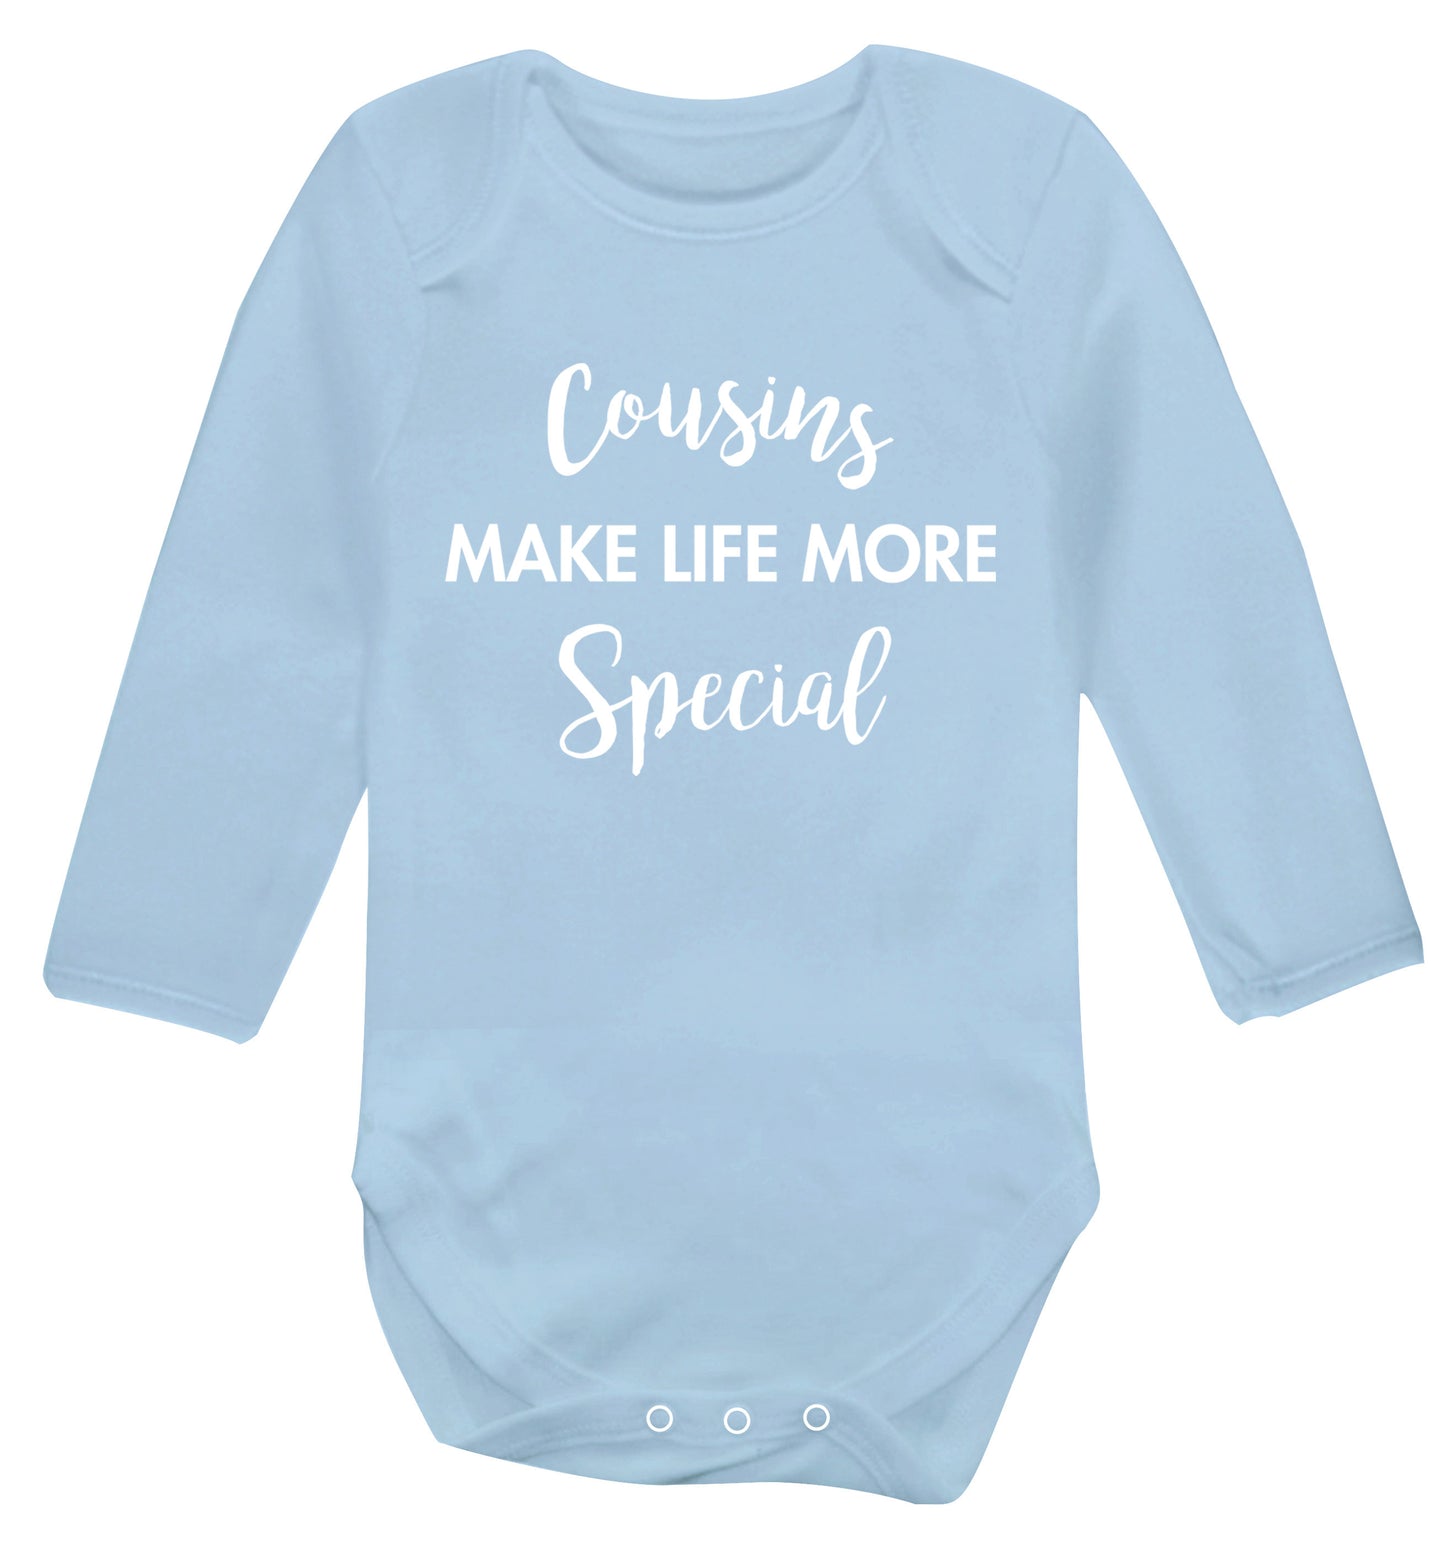 Cousins make life more special Baby Vest long sleeved pale blue 6-12 months